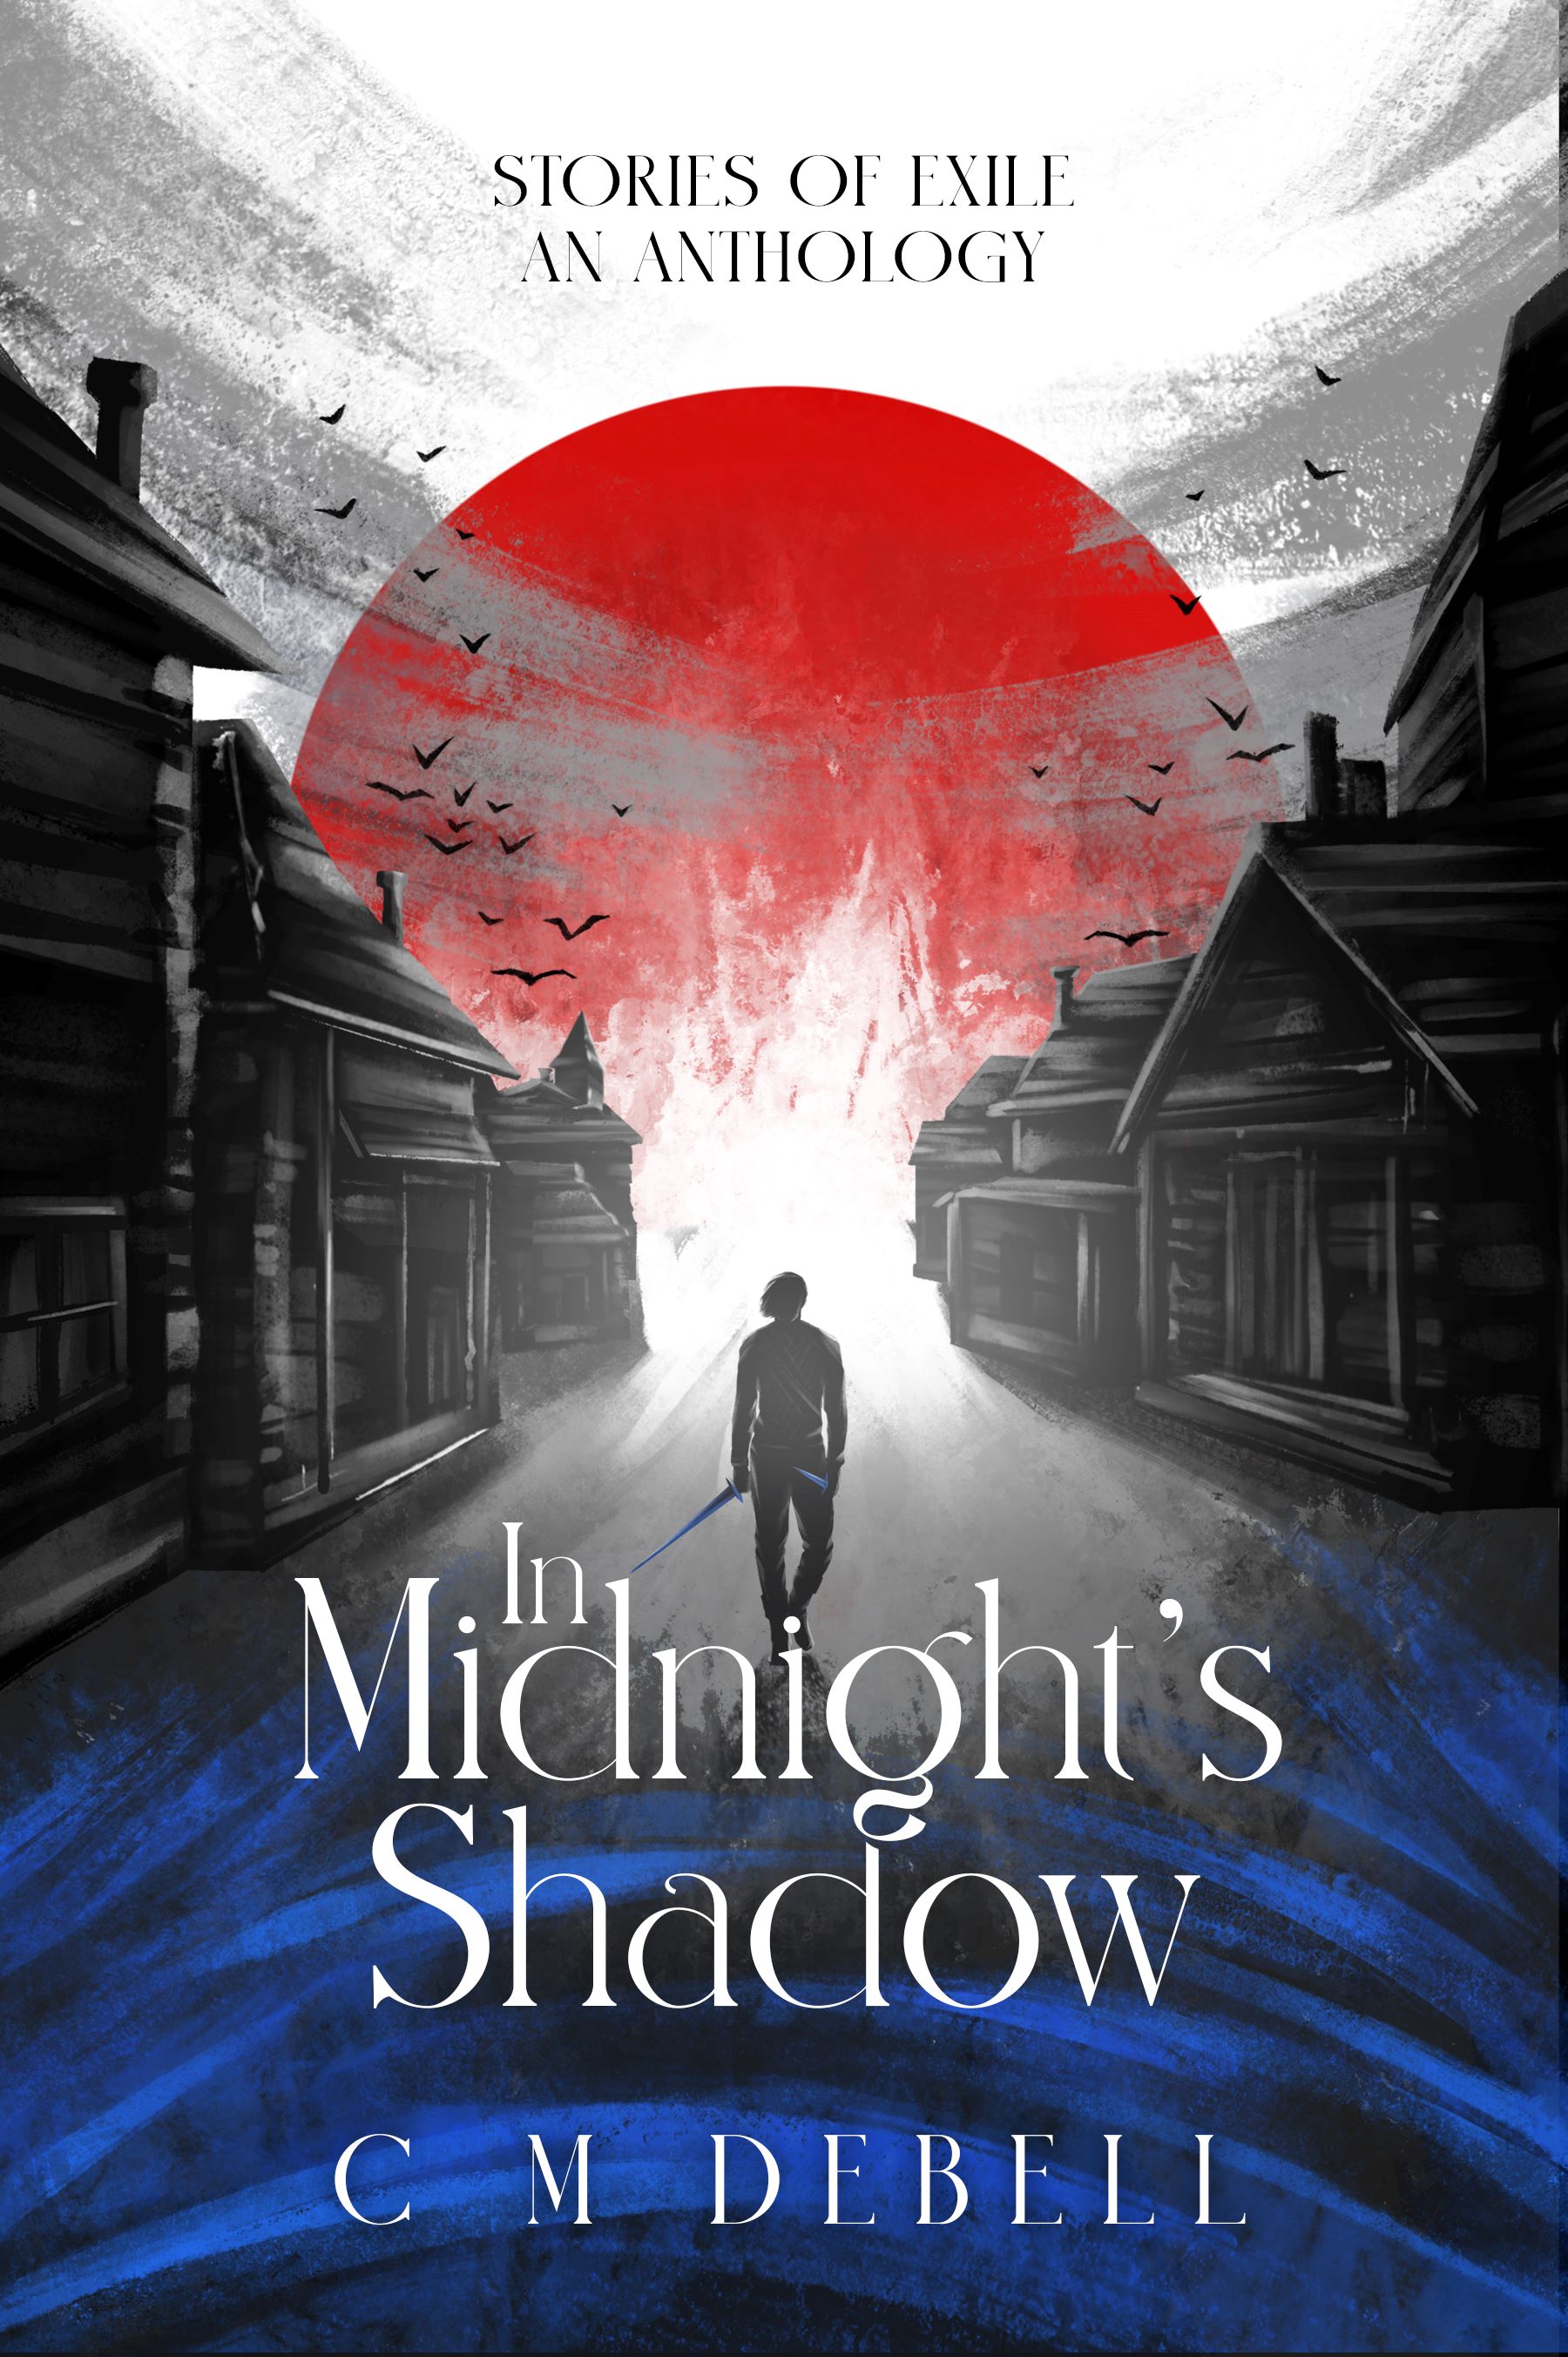 In Midnight's Shadow, by C.M. Debell